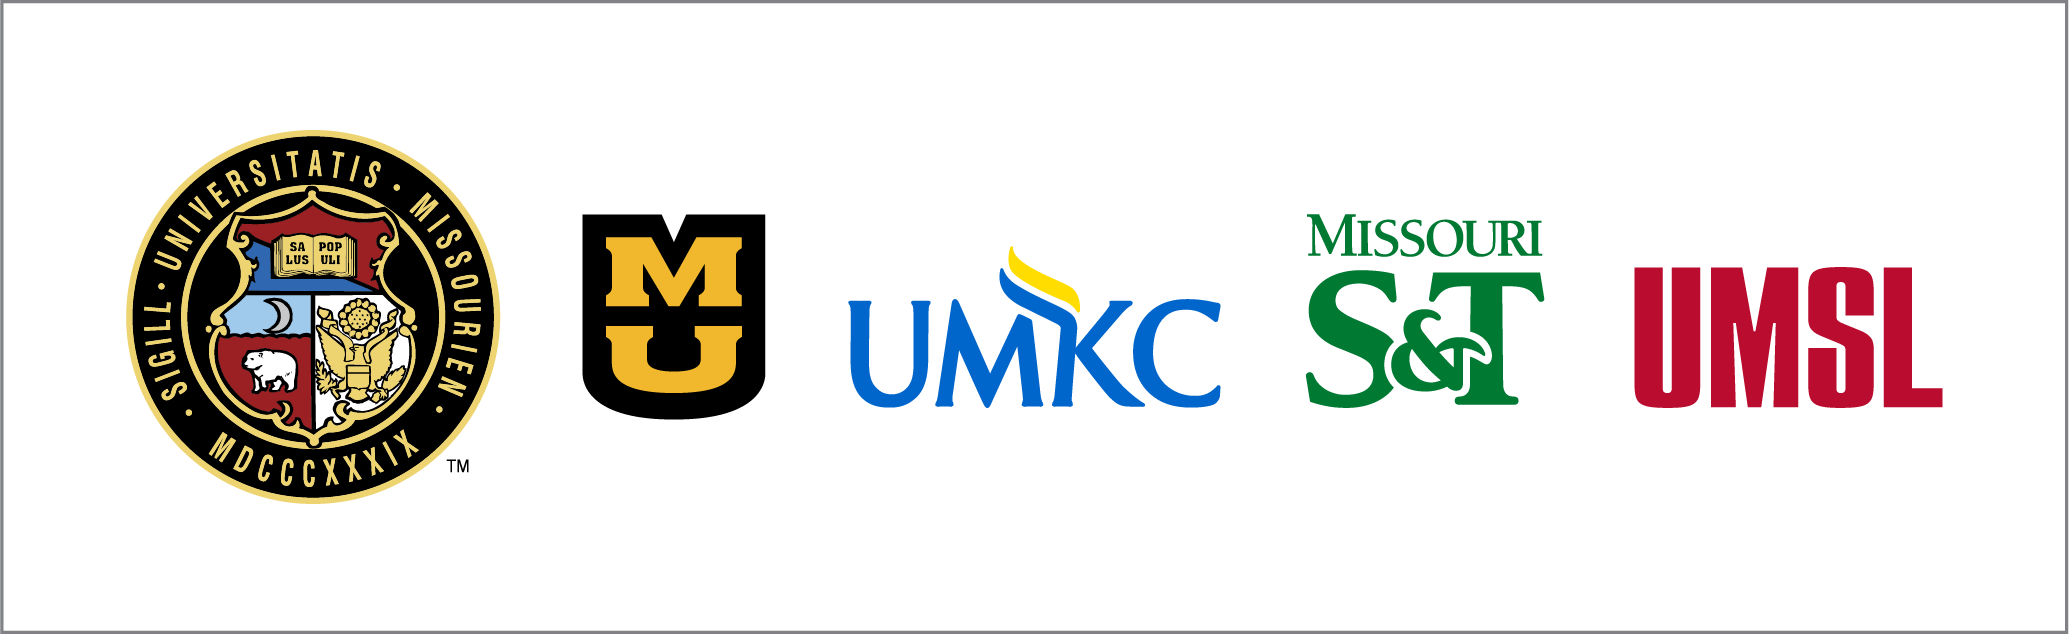 Horizontal UM System logo lockup with the UM Seal to the left of all four campus logos: University of Missouri-Columbia, University of Missouri-Kansas City, Missouri Science and Technology, University of Missouri-St. Louis